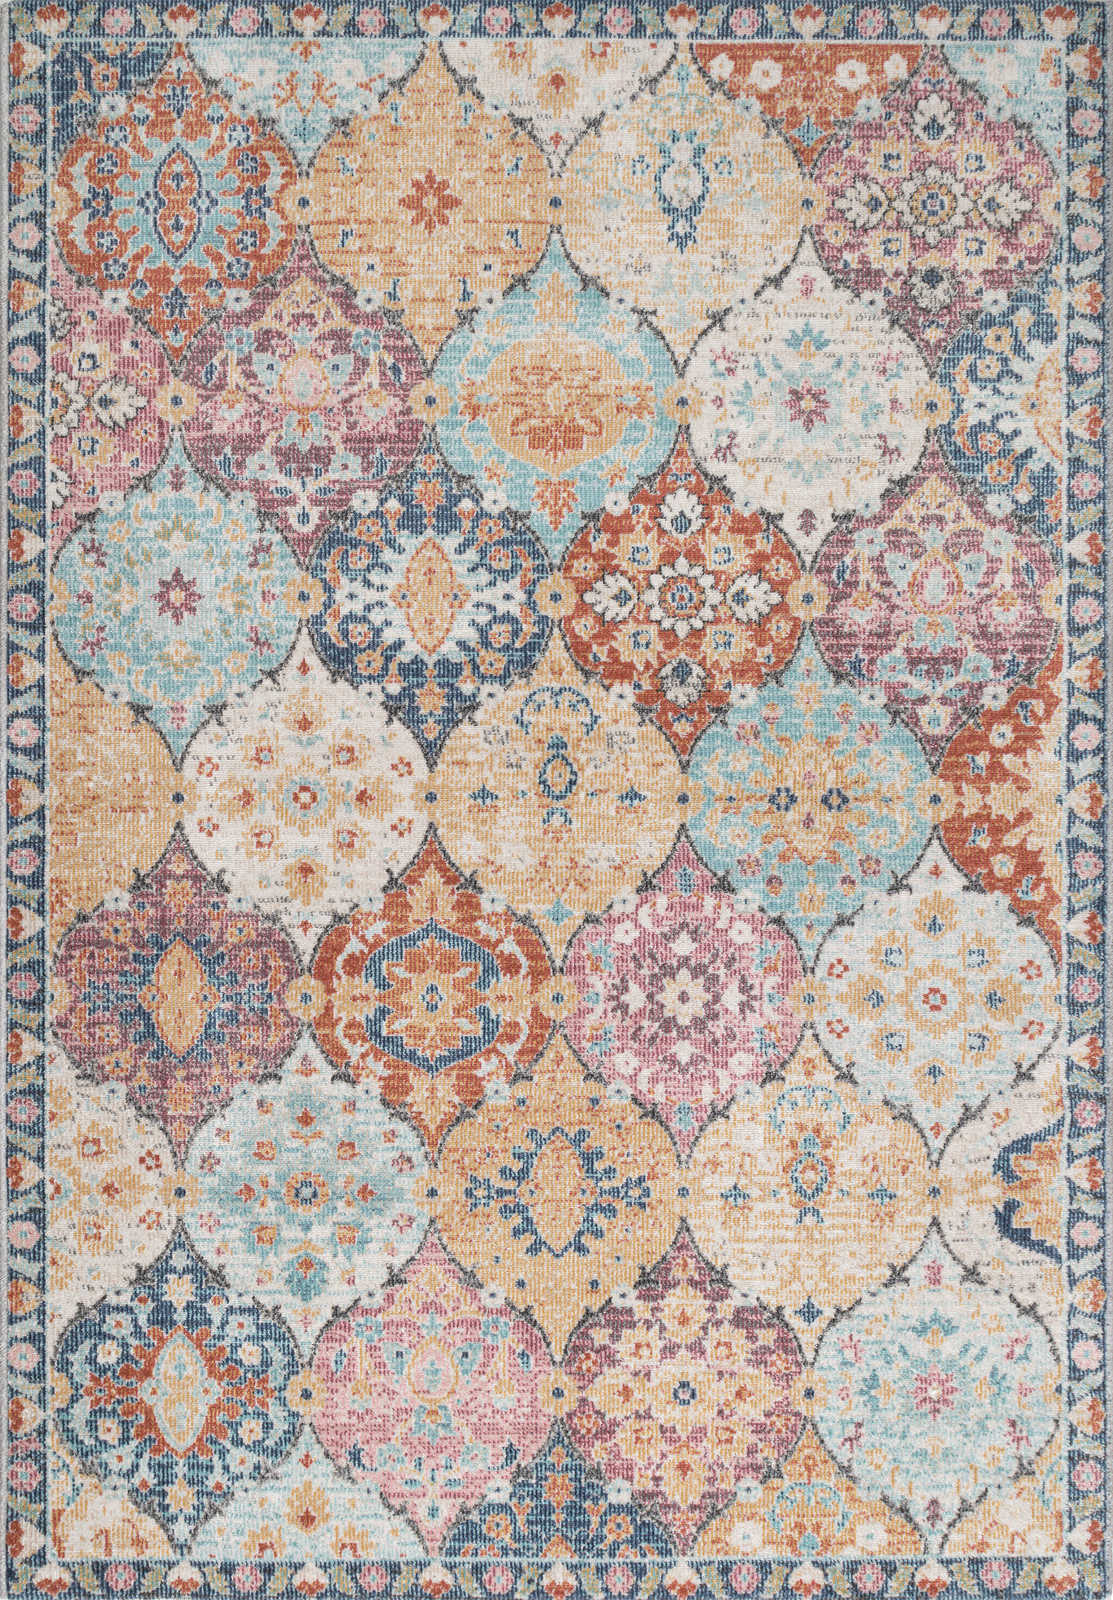             Colourful Flatweave Outdoor Rug - 200 x 140 cm
        